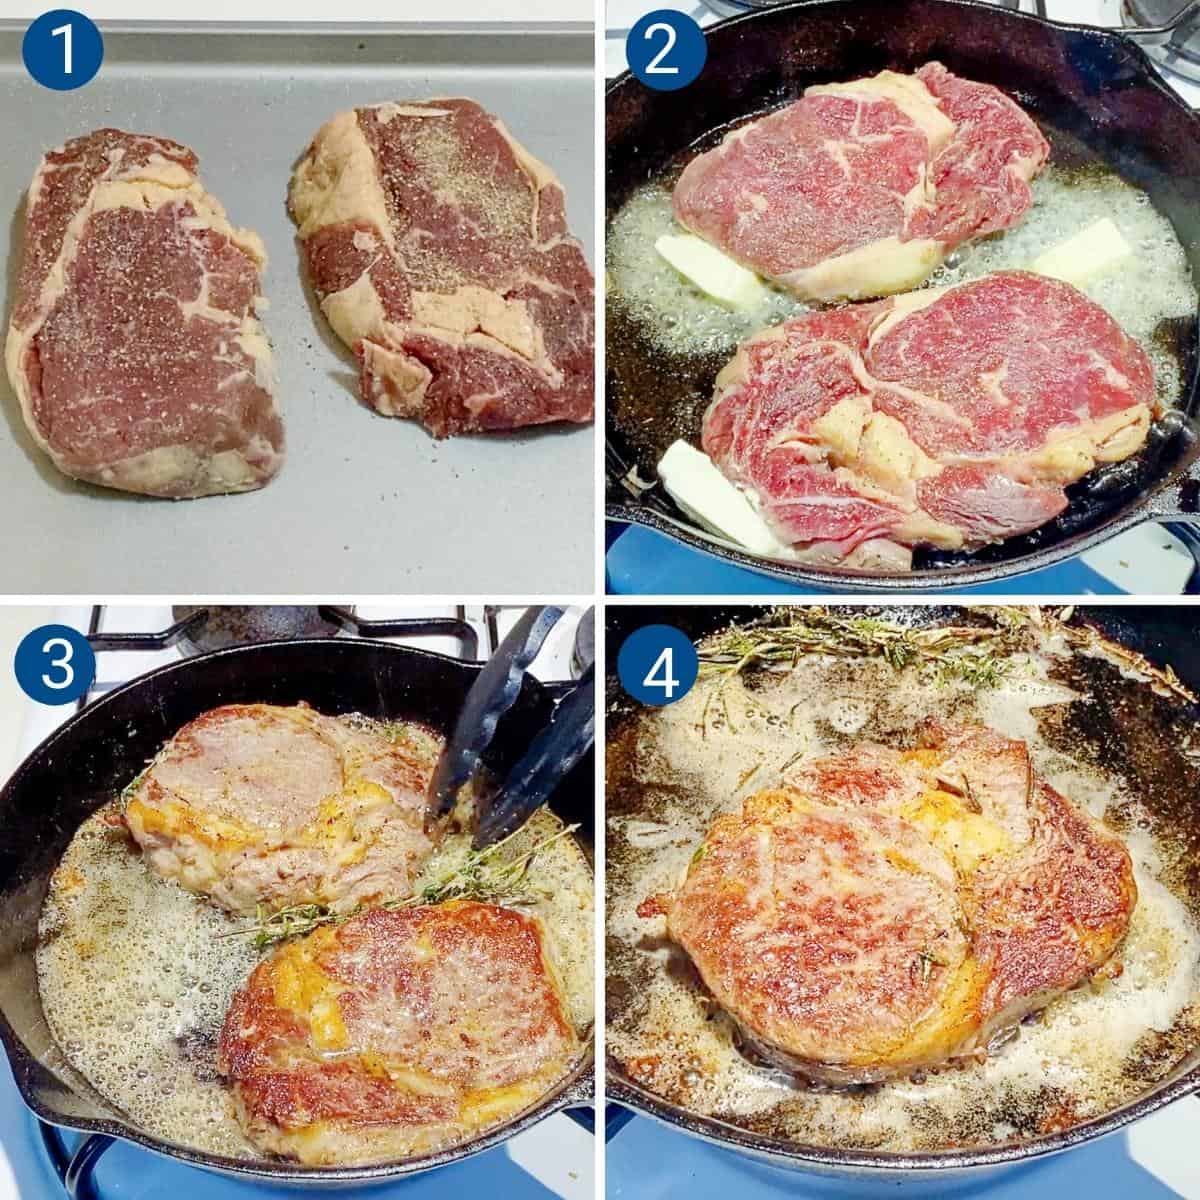 Progress pictures for cooking steak on the stovetop.